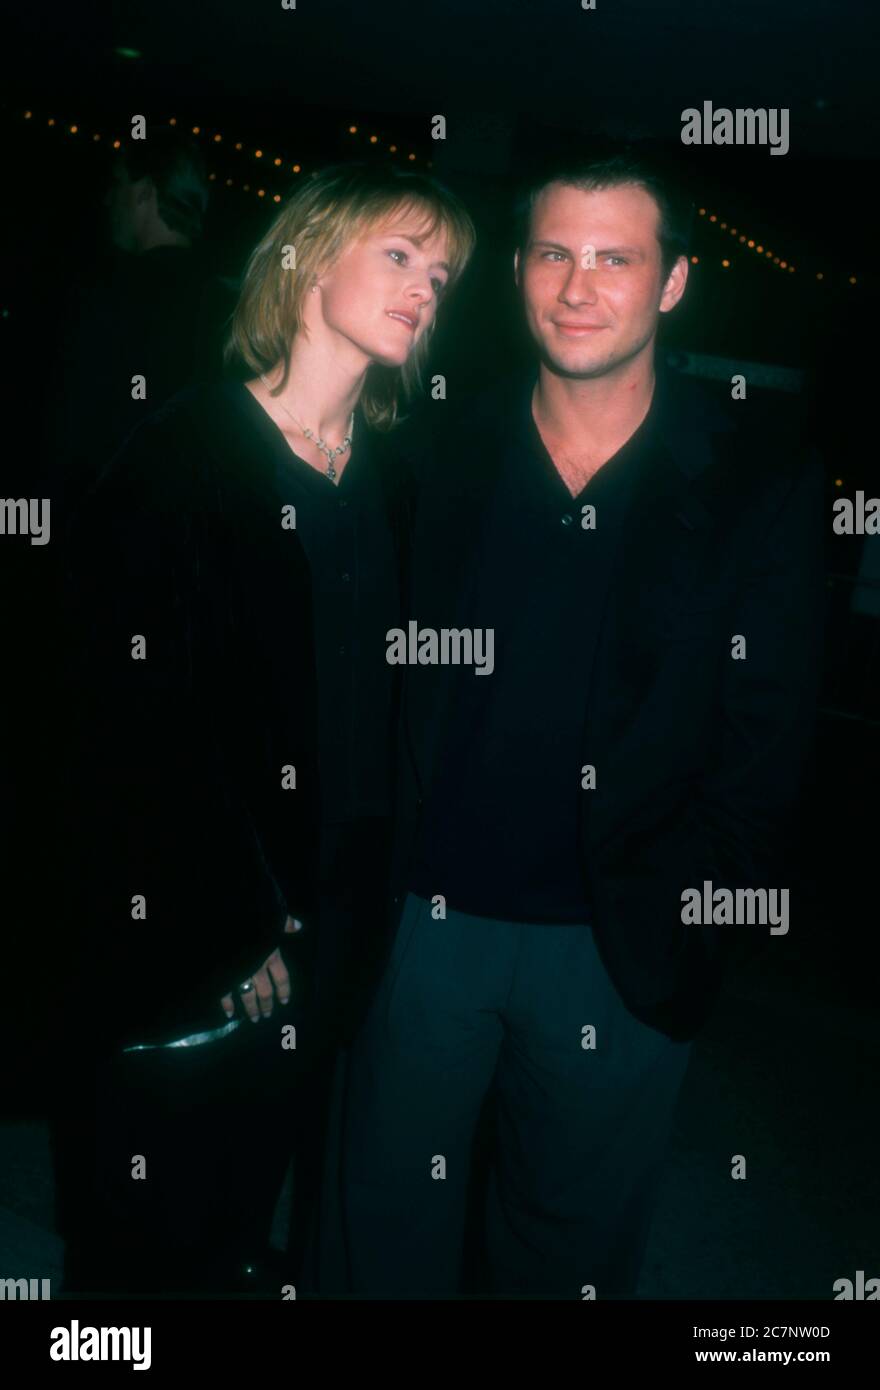 Century City, California, USA 18th January 1996 Actress Mary Stuart Masterson and actor Christian Slater attend New Line Cinema's 'Bed of Roses' Premiere on January 18, 1996 at Cineplex Odeon Century Plaza Cinemas in Century City, California, USA. Photo by Barry King/Alamy Stock Photo Stock Photo